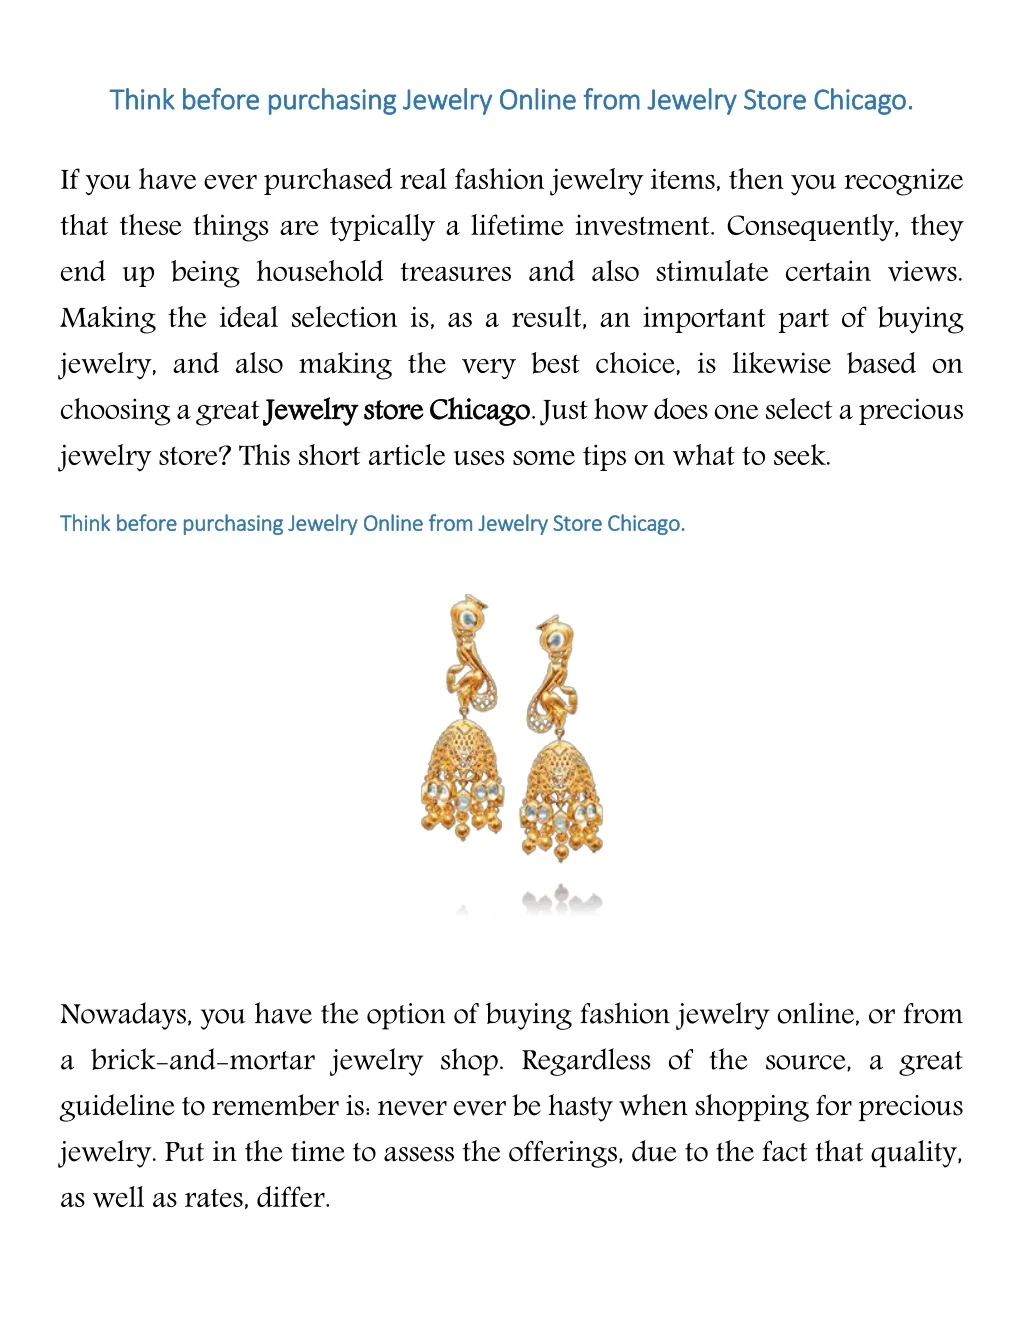 think before purchasing jewelry online from